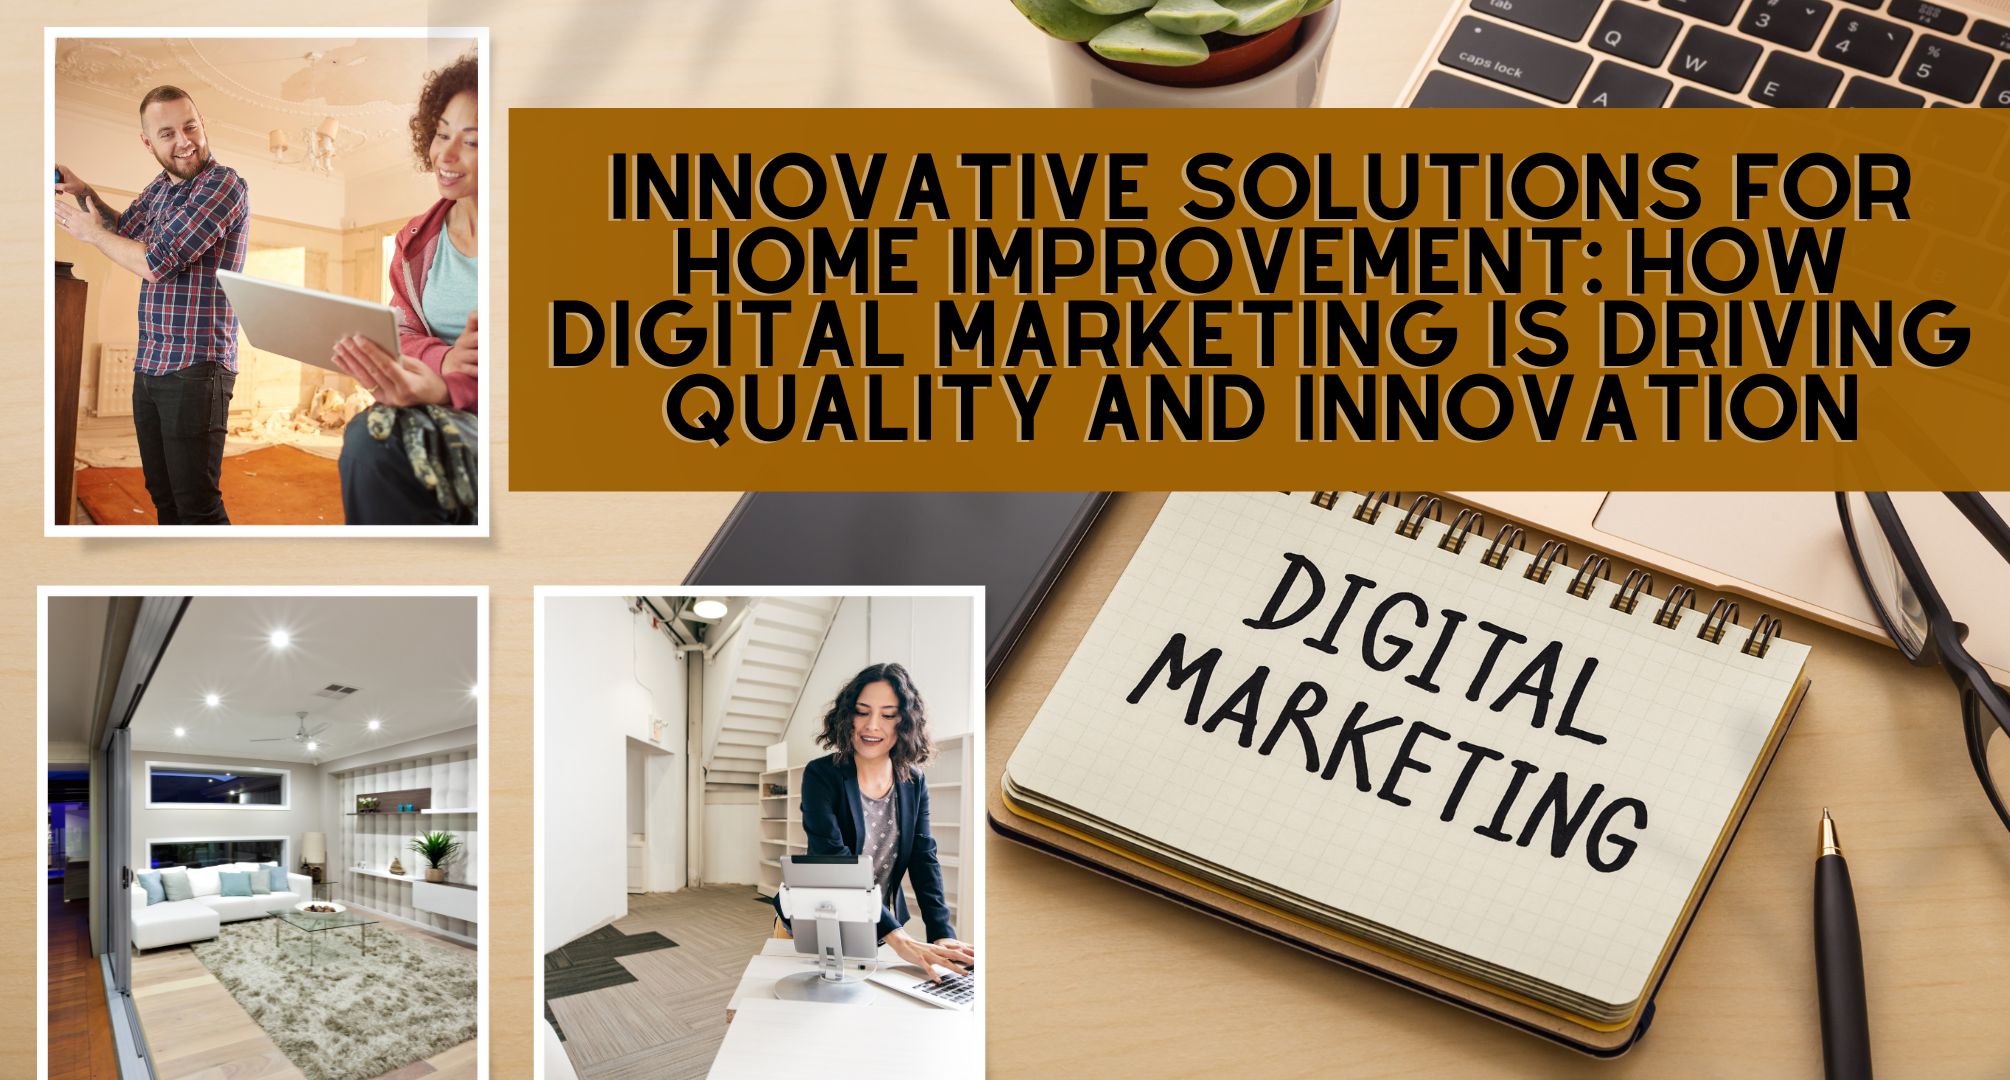 Innovative Solutions for Home Improvement: How Digital Marketing is Driving Quality and Innovation